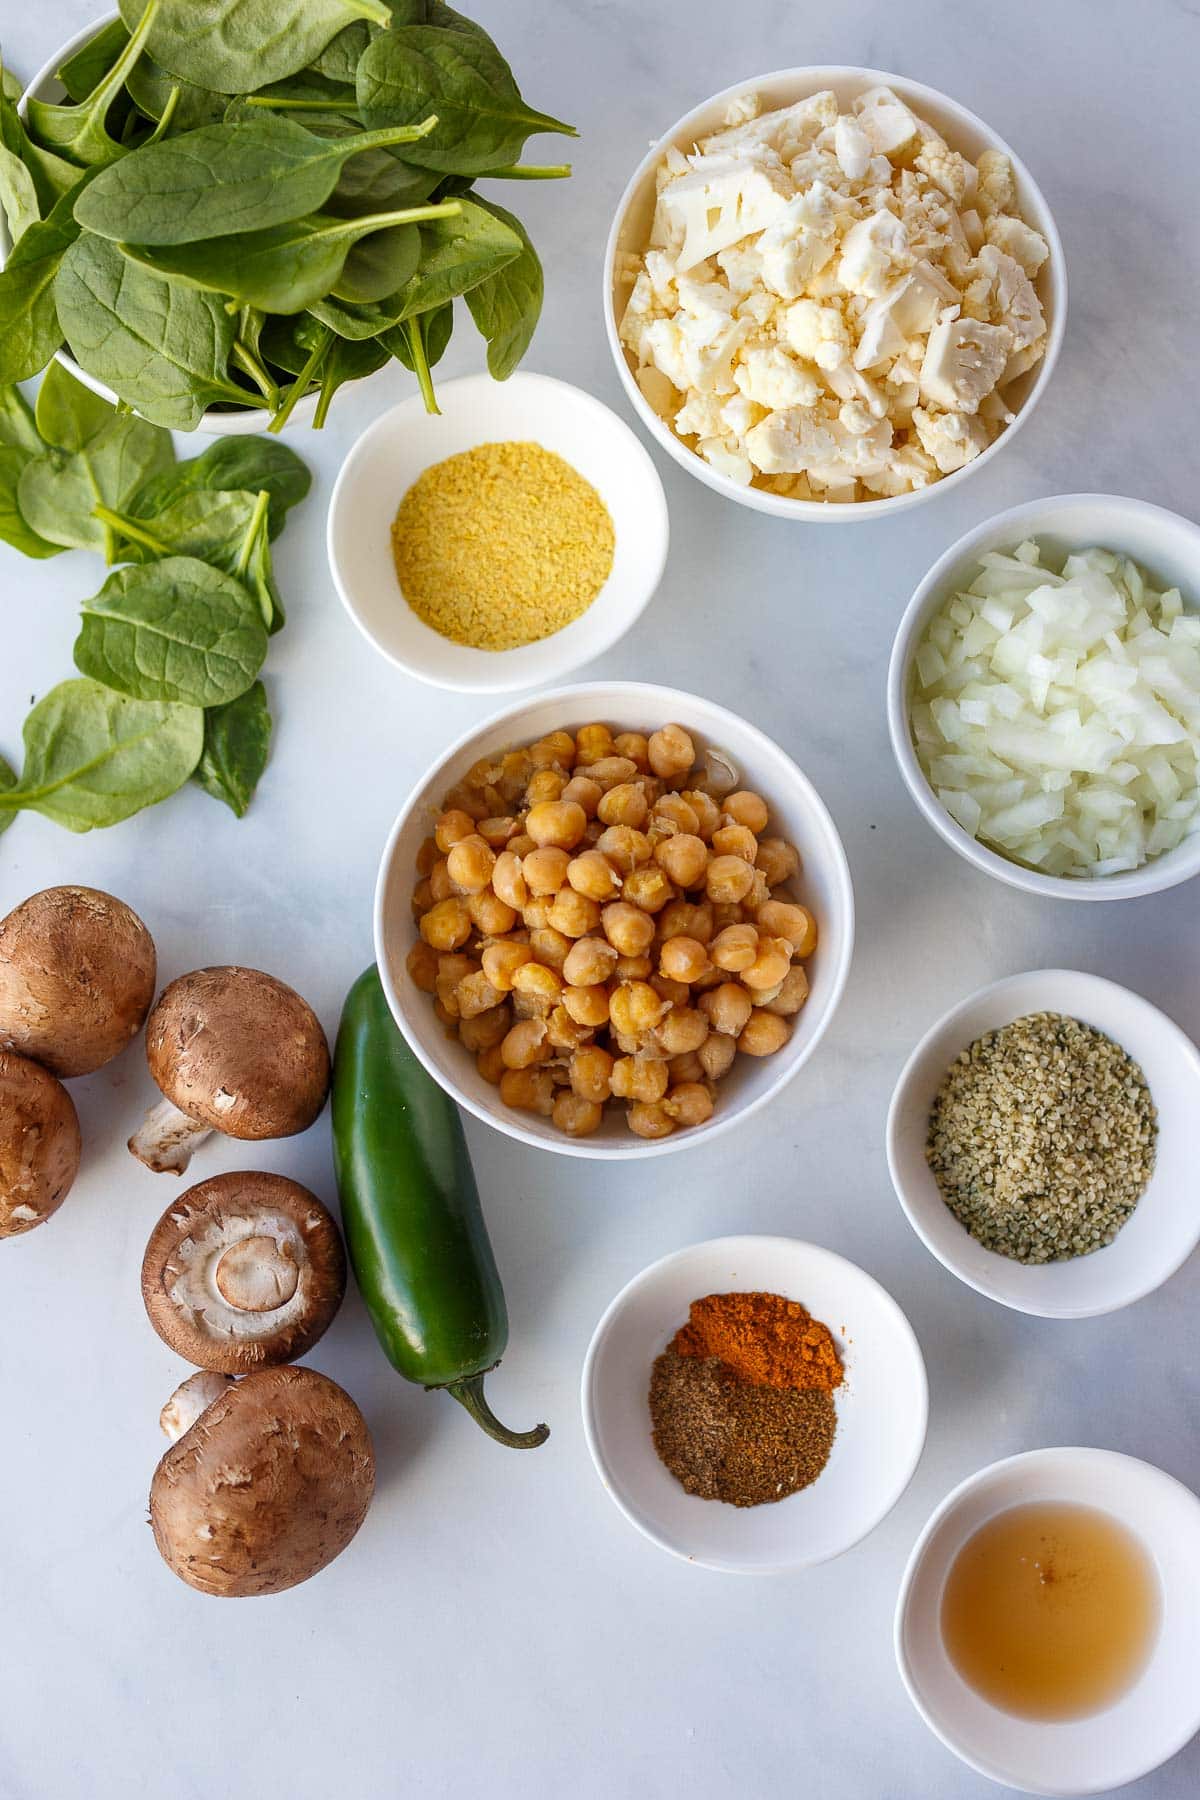 ingredients for chickpea scramble in bowls - chickpeas, onions, cauliflower, nutritional yeast, spices, hemp seeds, oil, spinach, mushrooms, jalapeno.